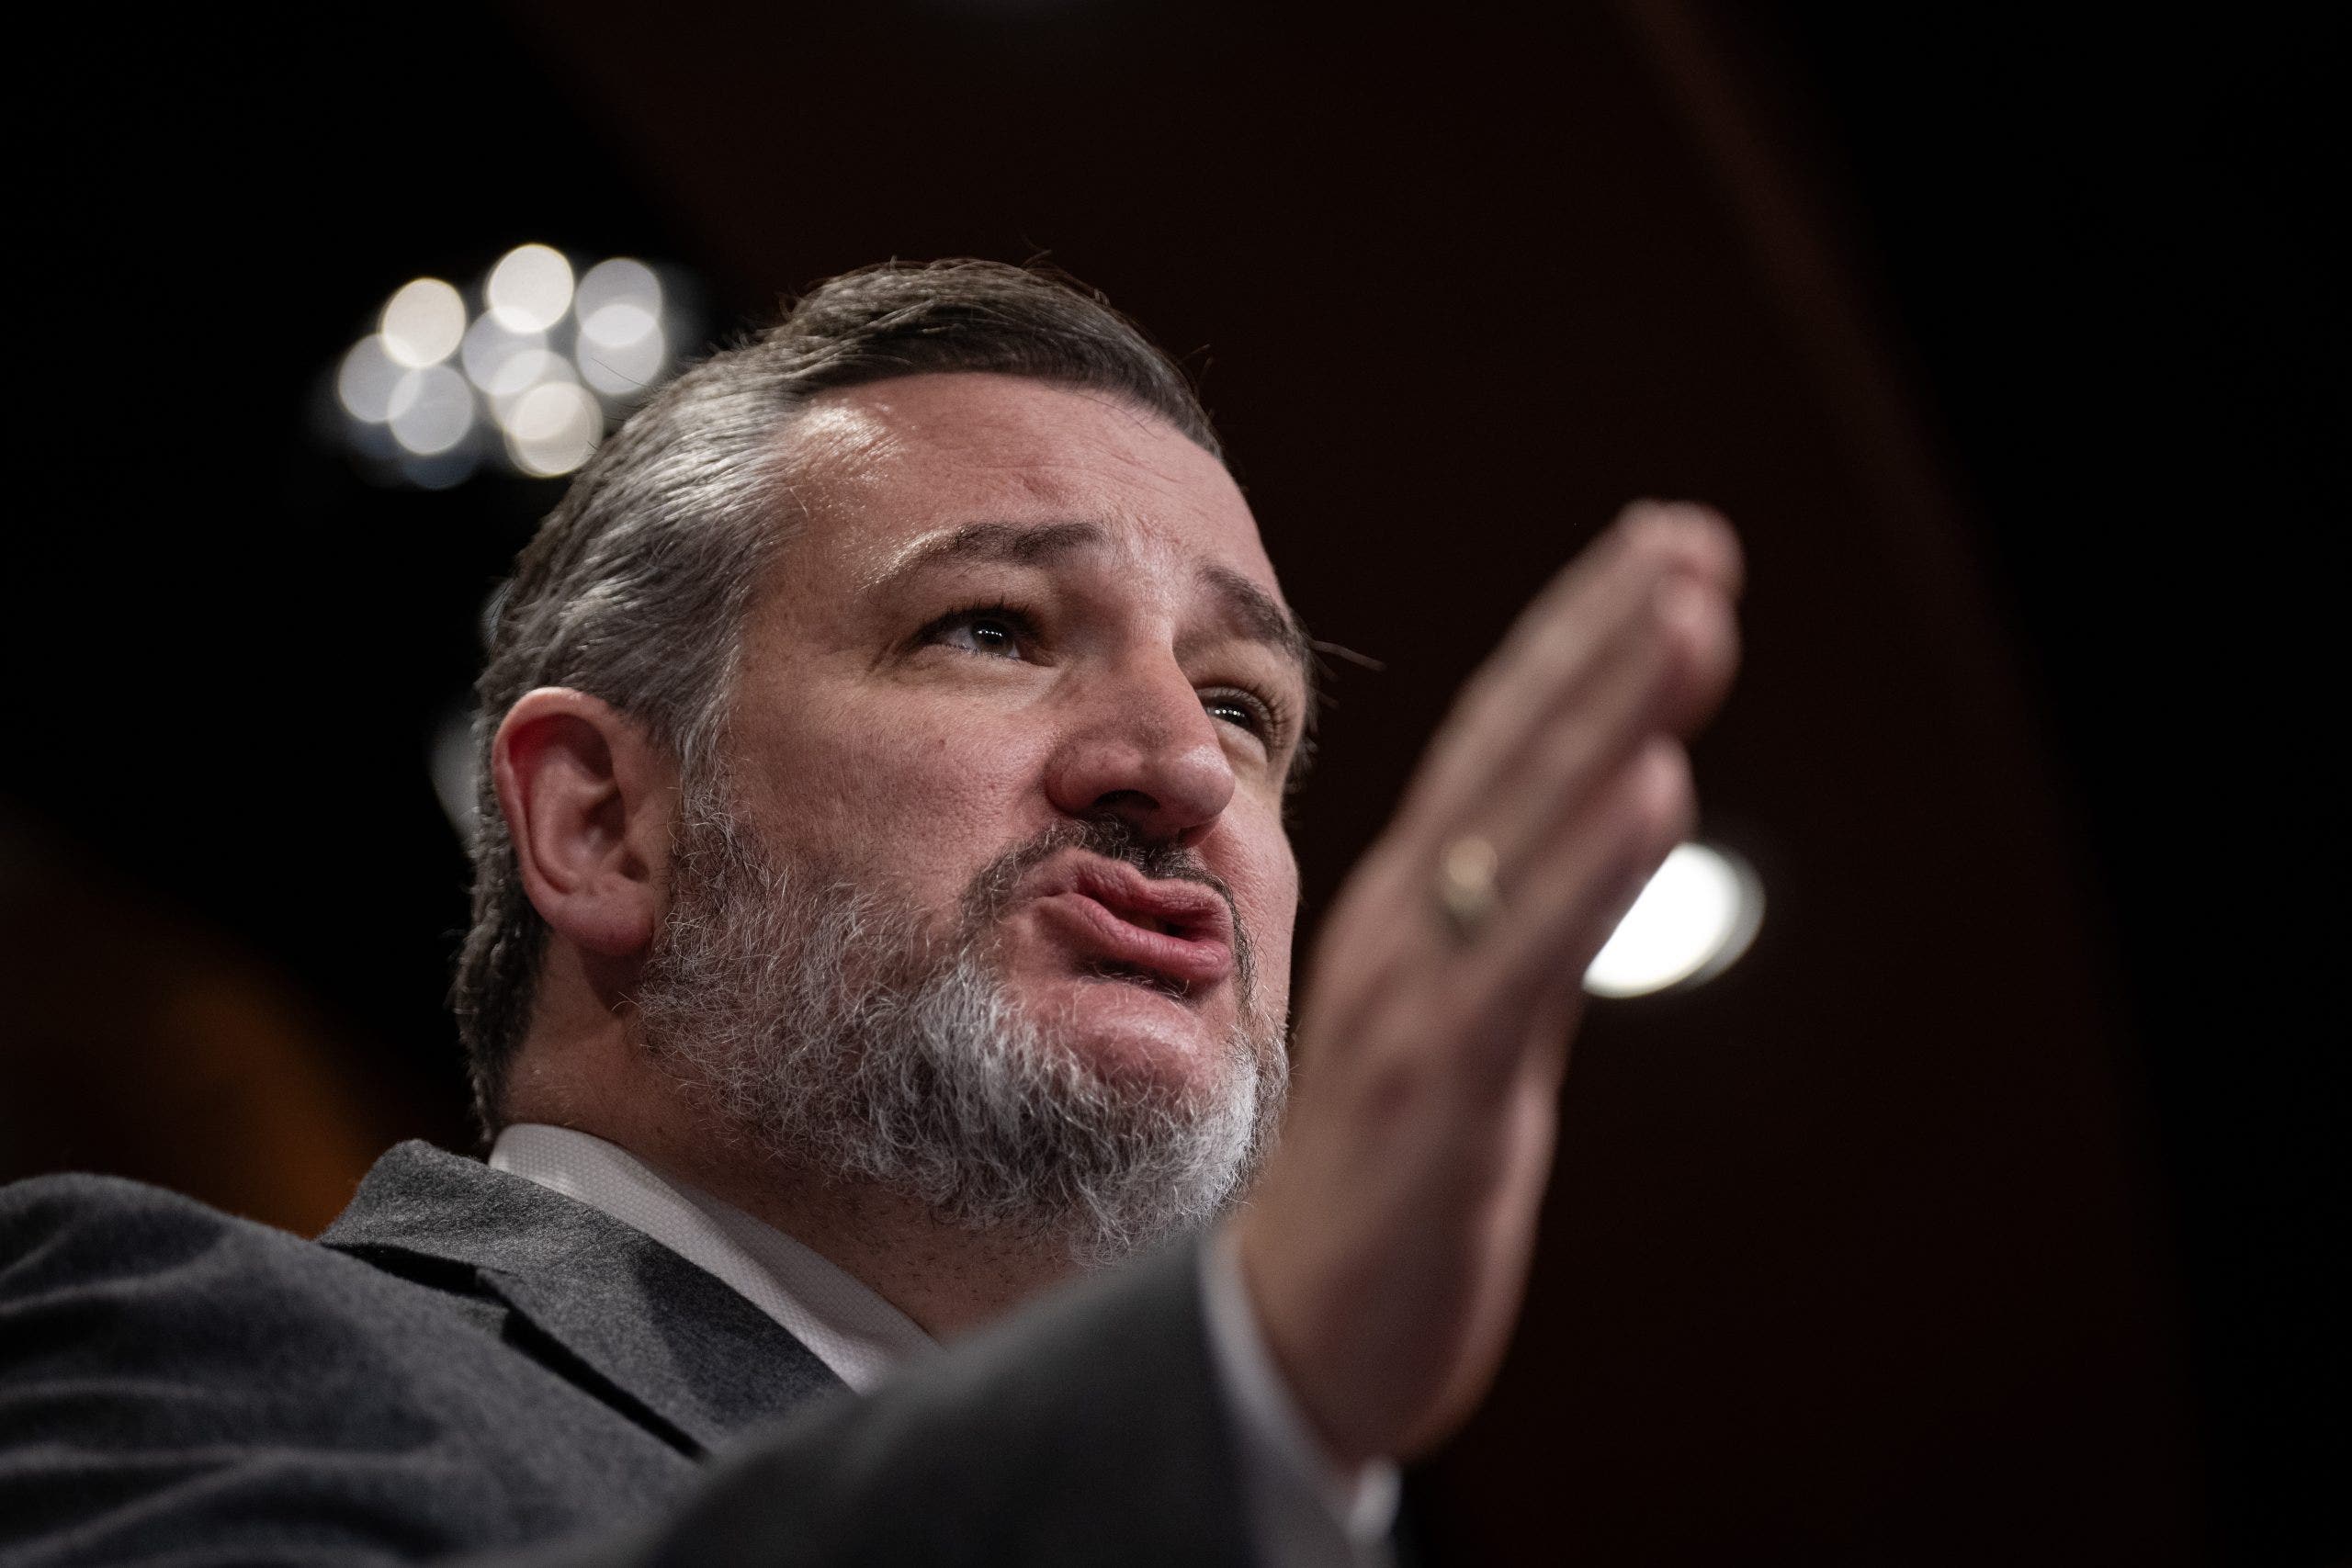 This week was a ‘bad week’ for the US Constitution, Ted Cruz says